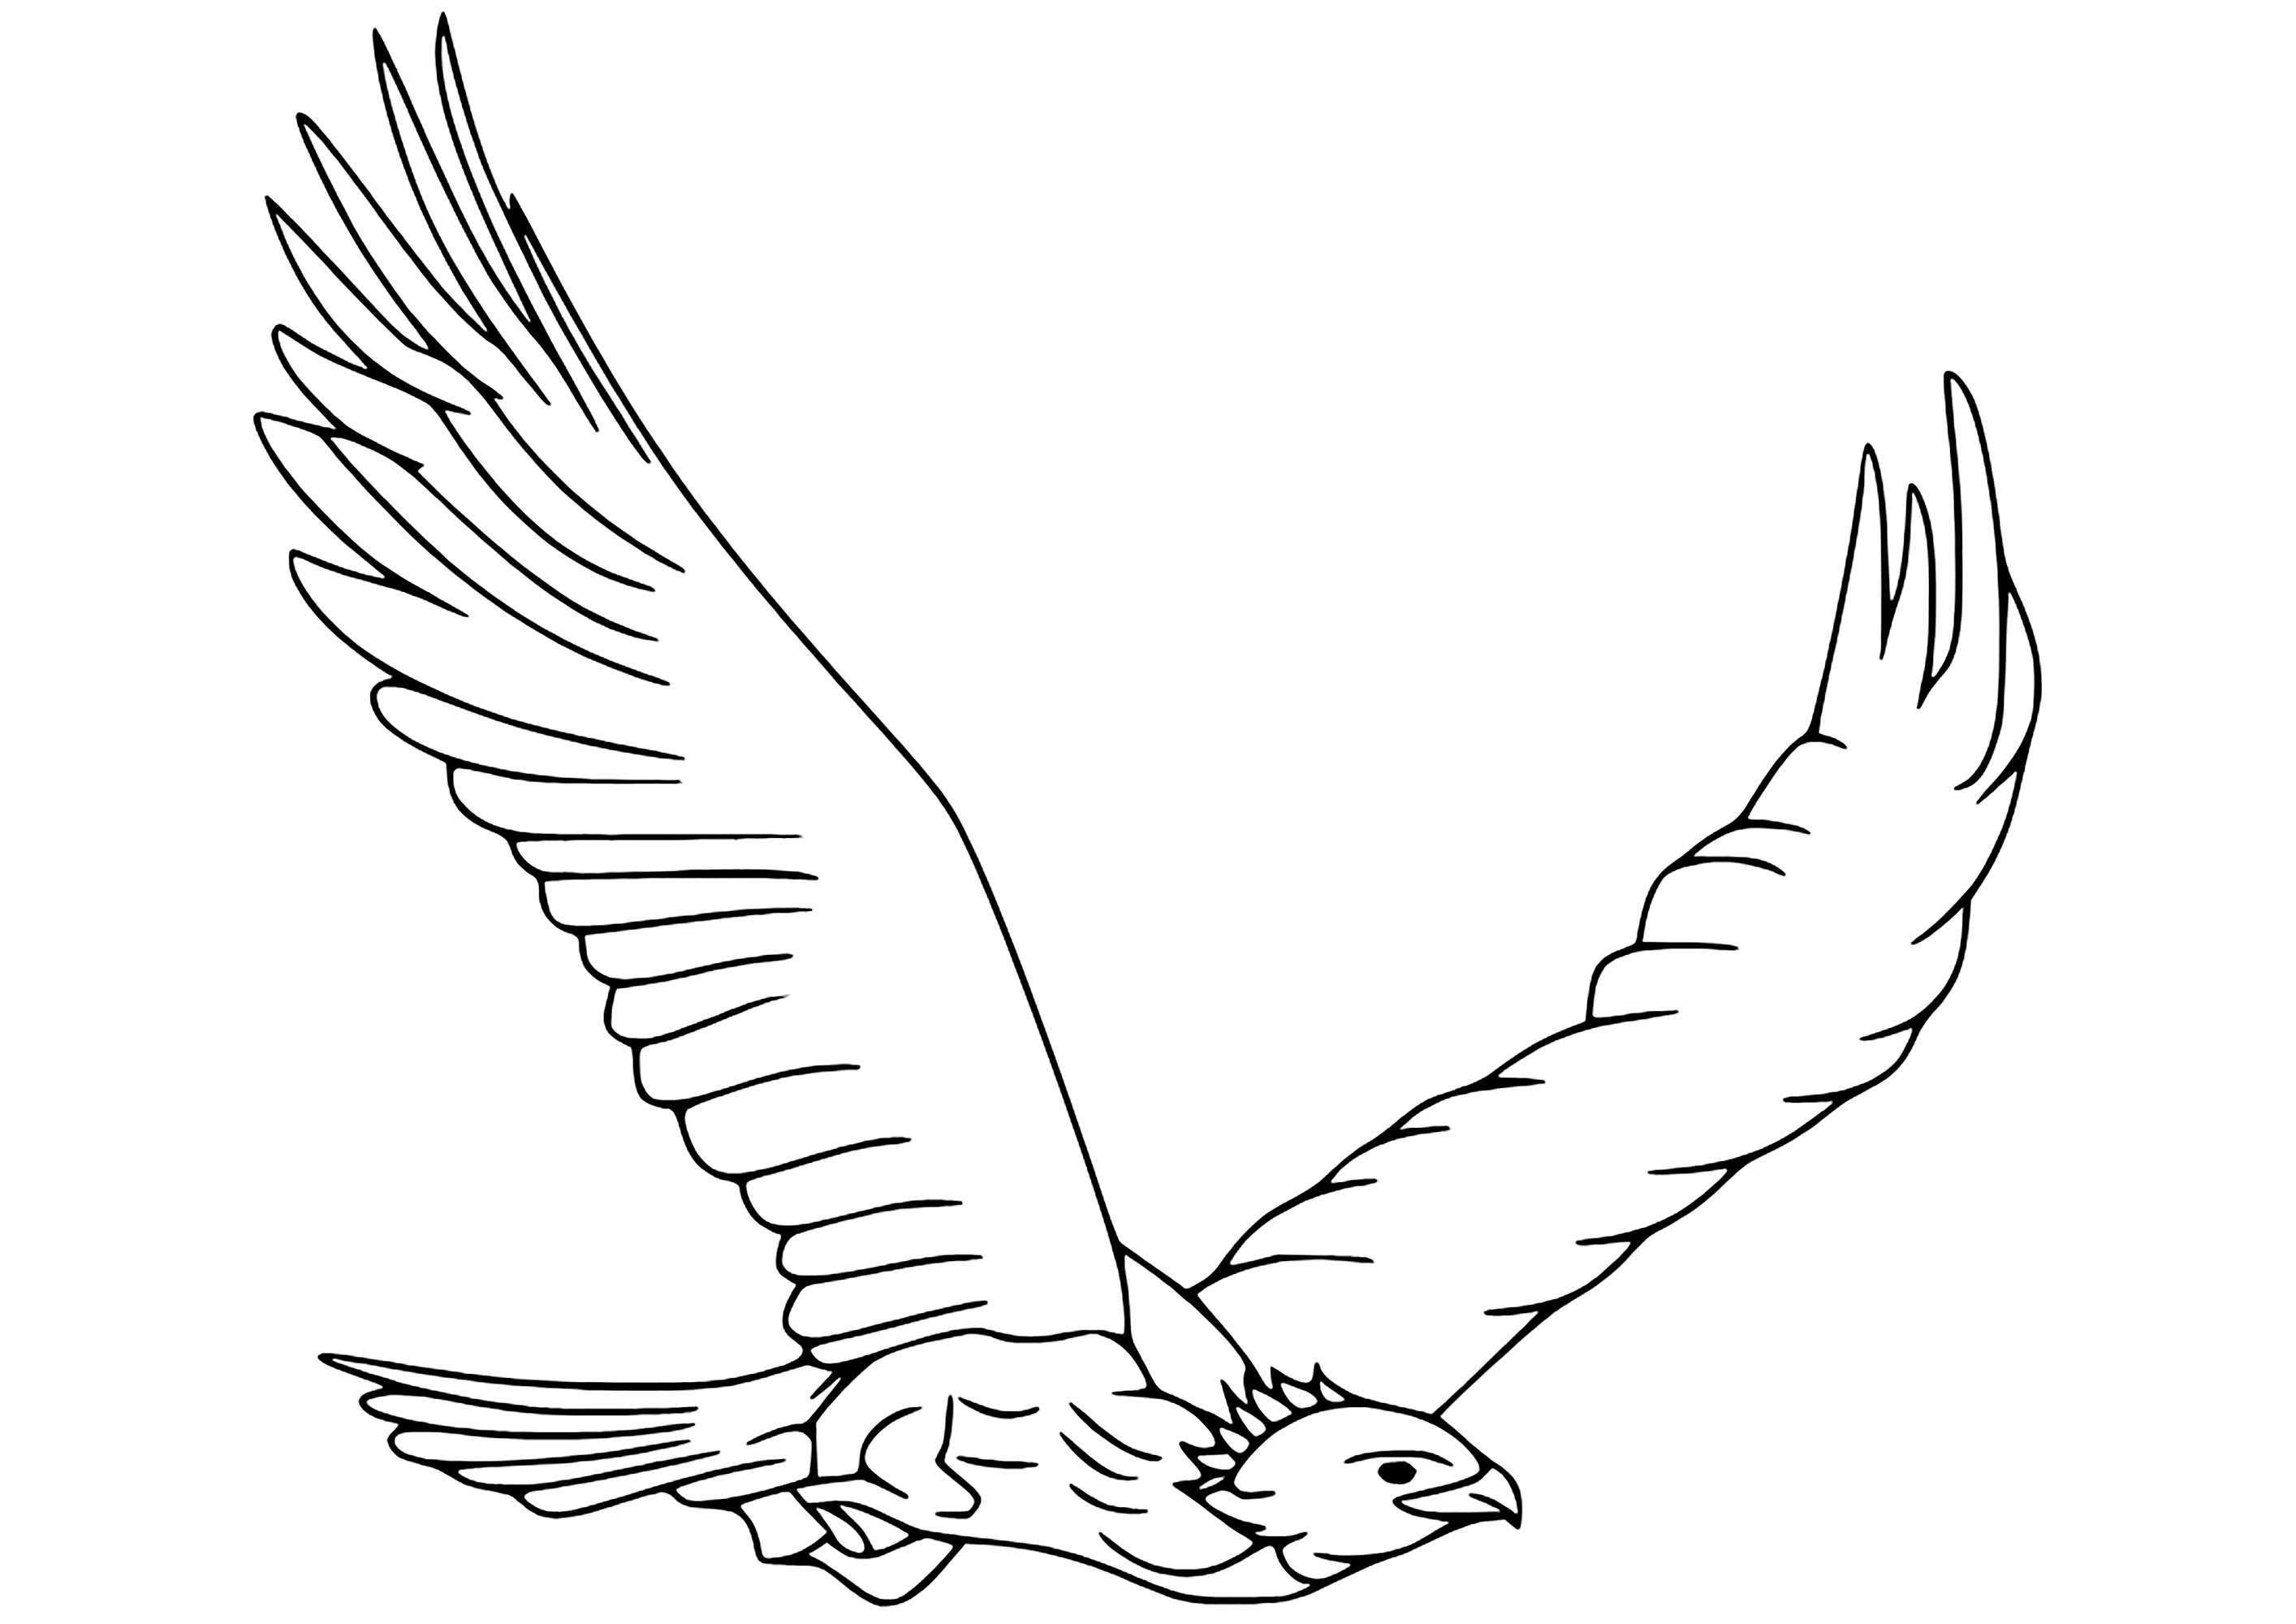 Simple eagle coloring page. Very realistic, and easy to color